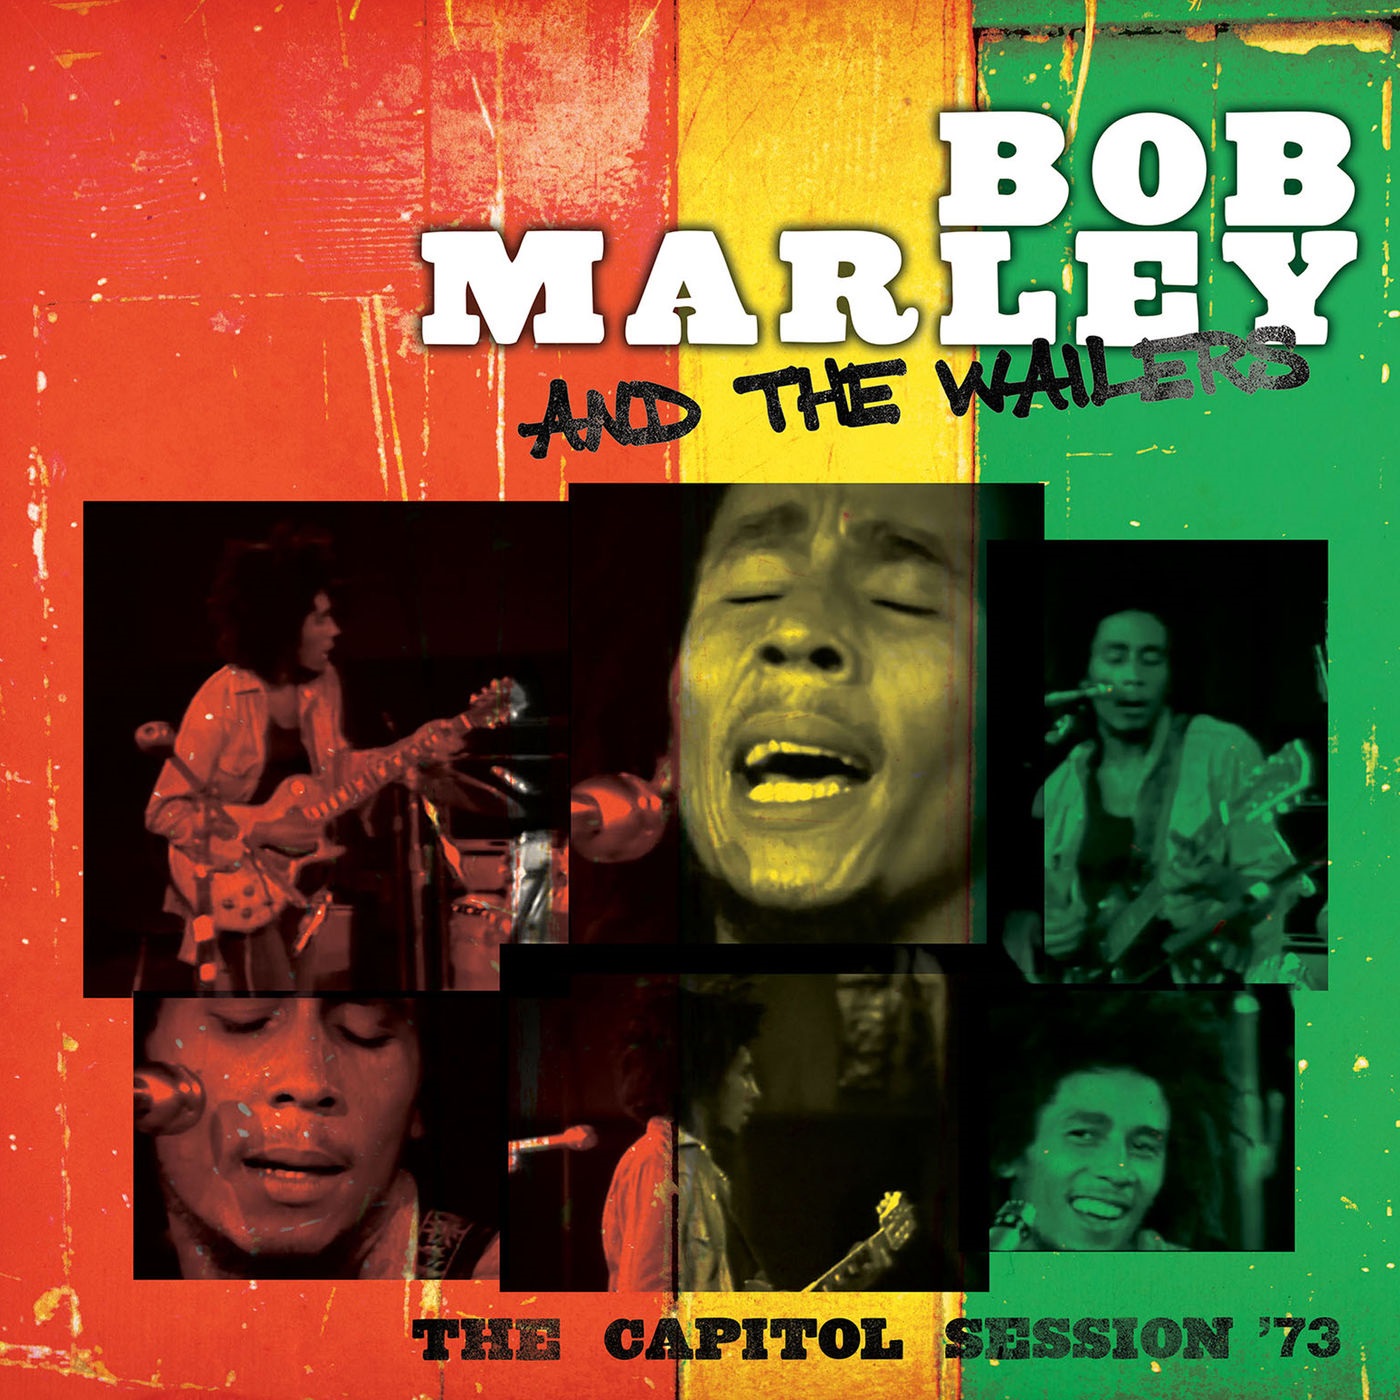 Bob Marley & The Wailers - The Capitol Session ’73 (2021) [FLAC 24bit/48kHz]